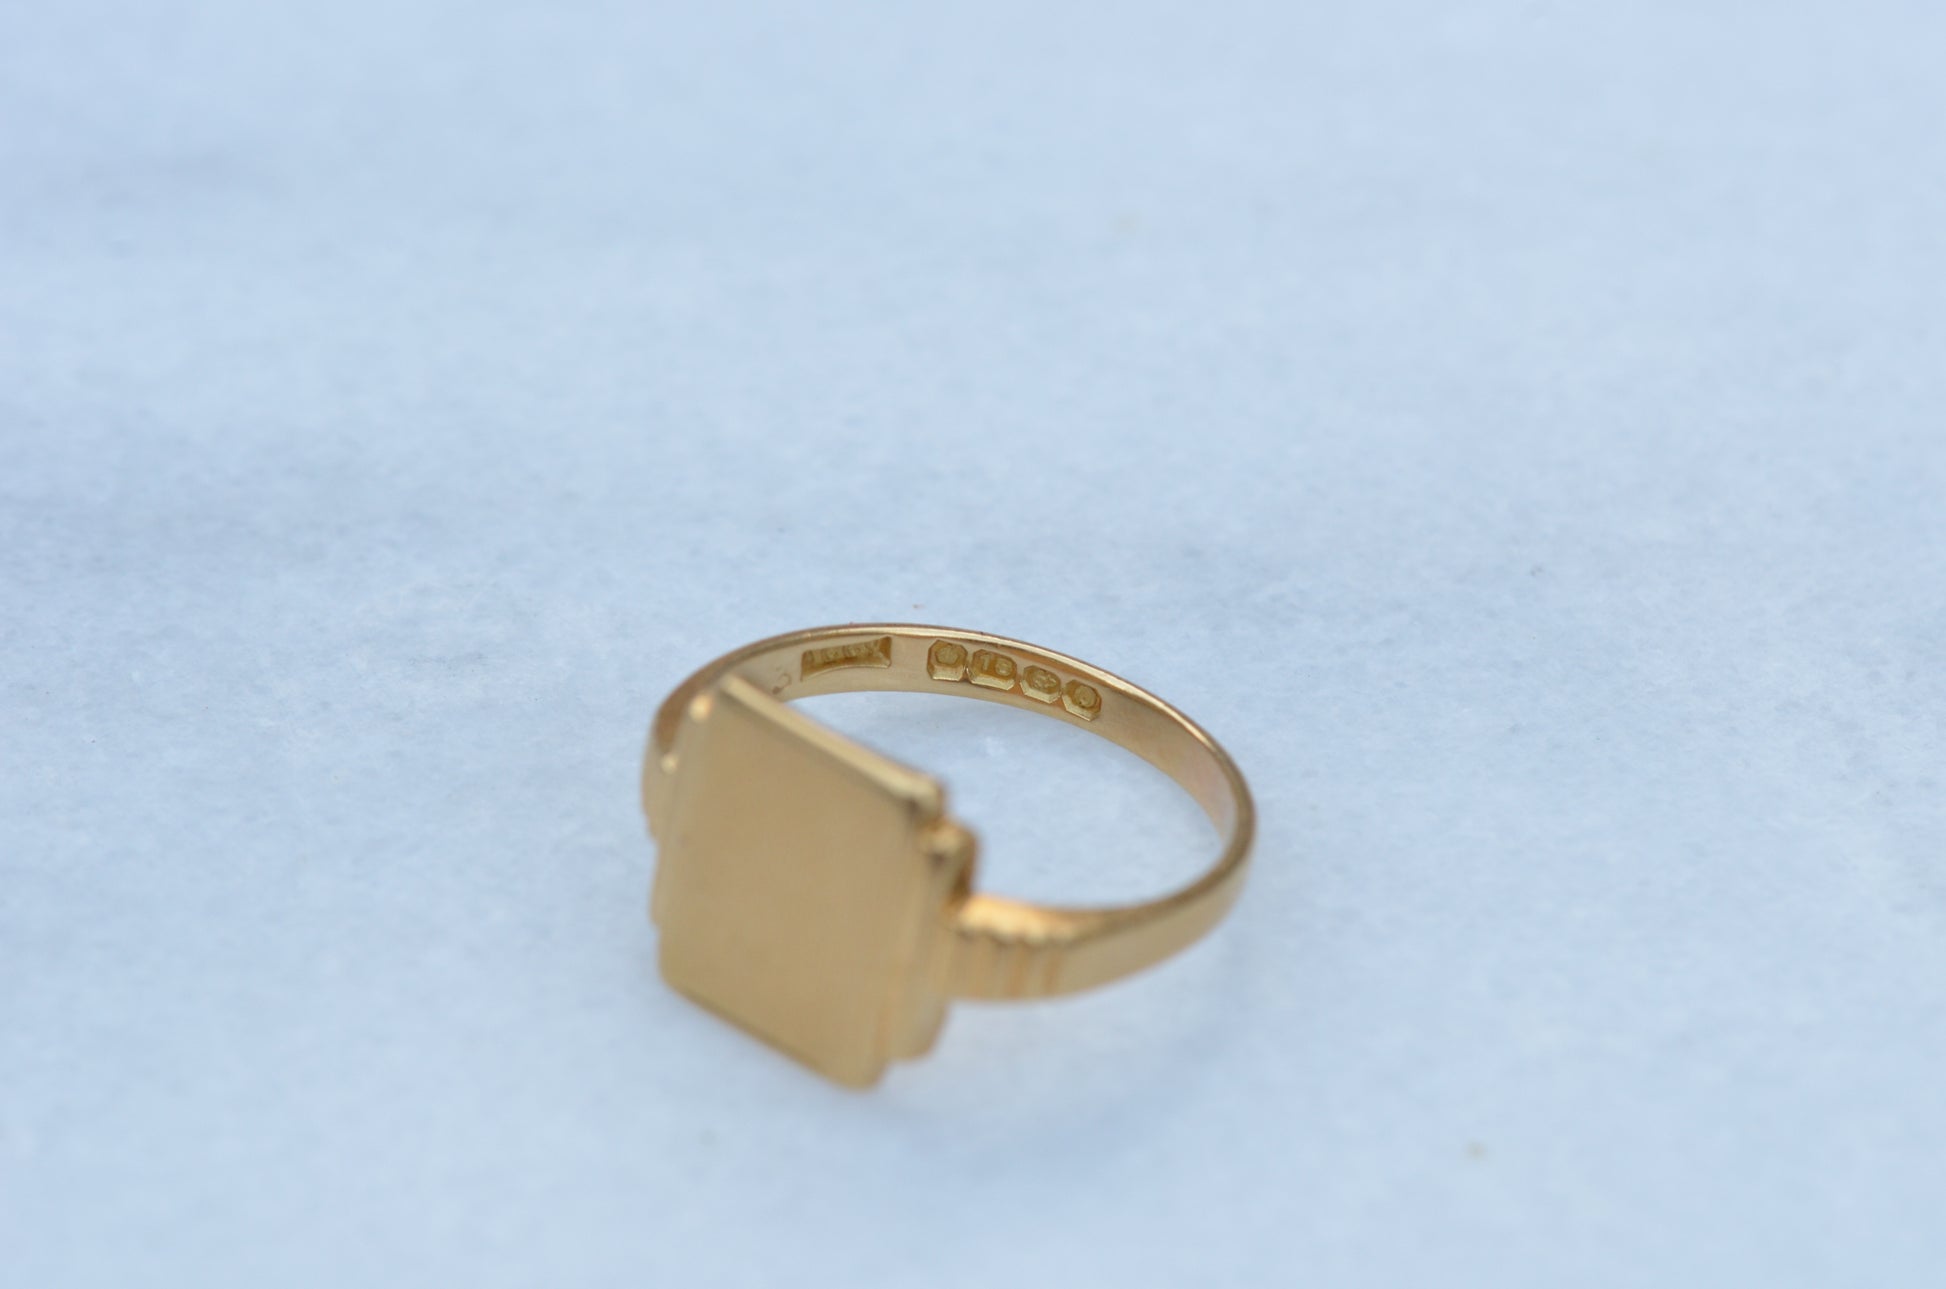 The ring is viewed looking into the band to see the crisp full series of British hallmark stamps.